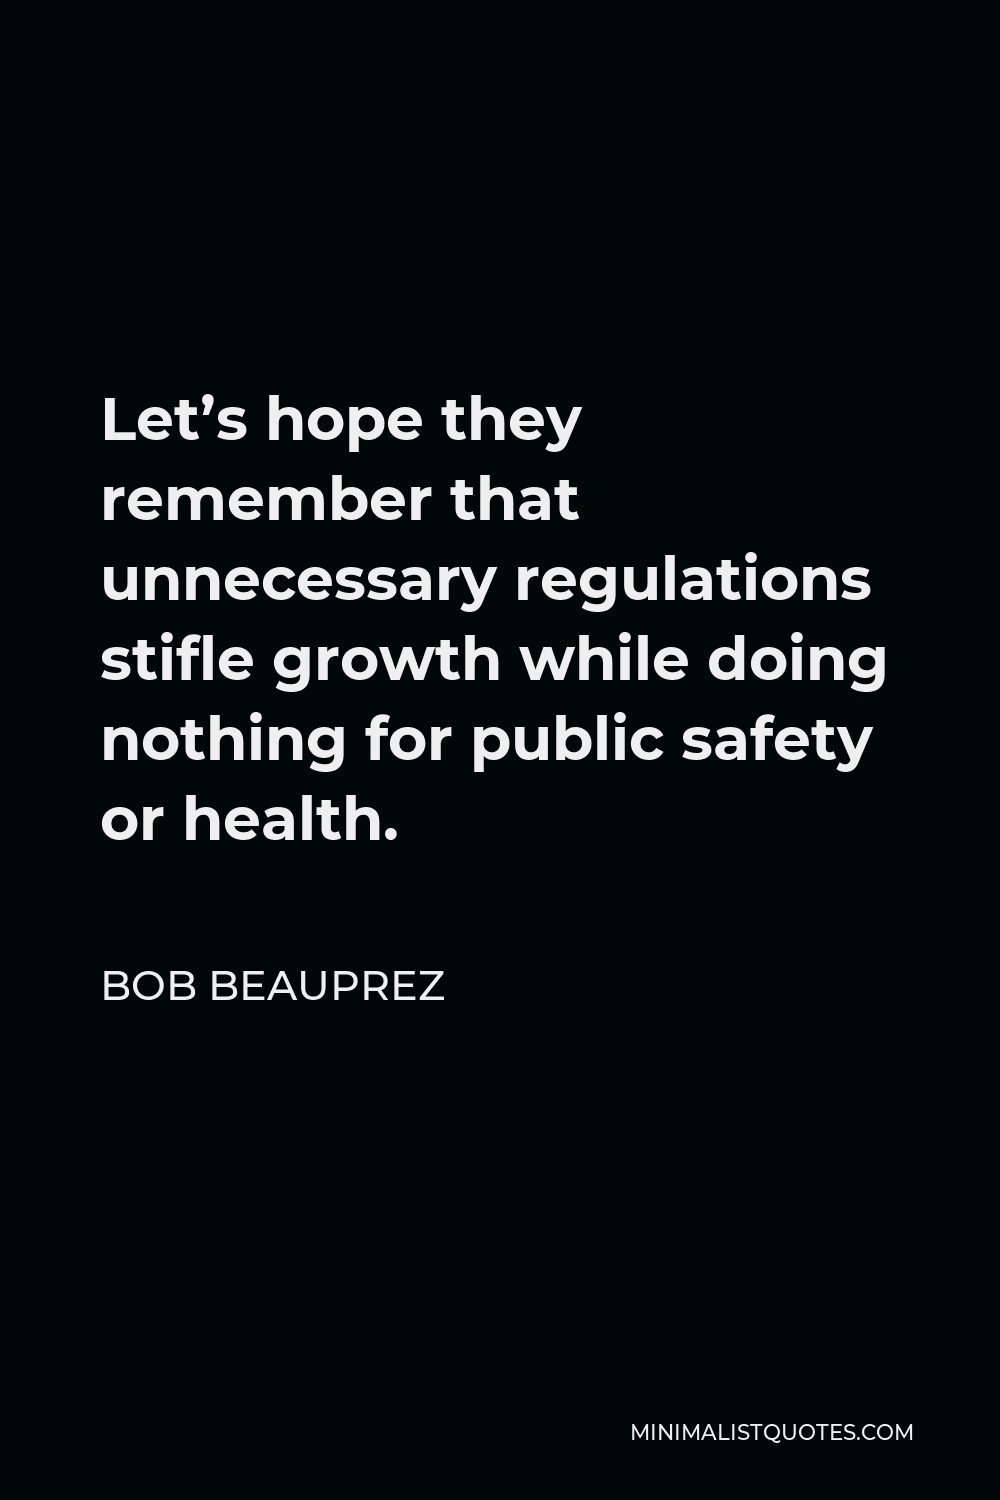 Bob Beauprez Quote - Let’s hope they remember that unnecessary regulations stifle growth while doing nothing for public safety or health.